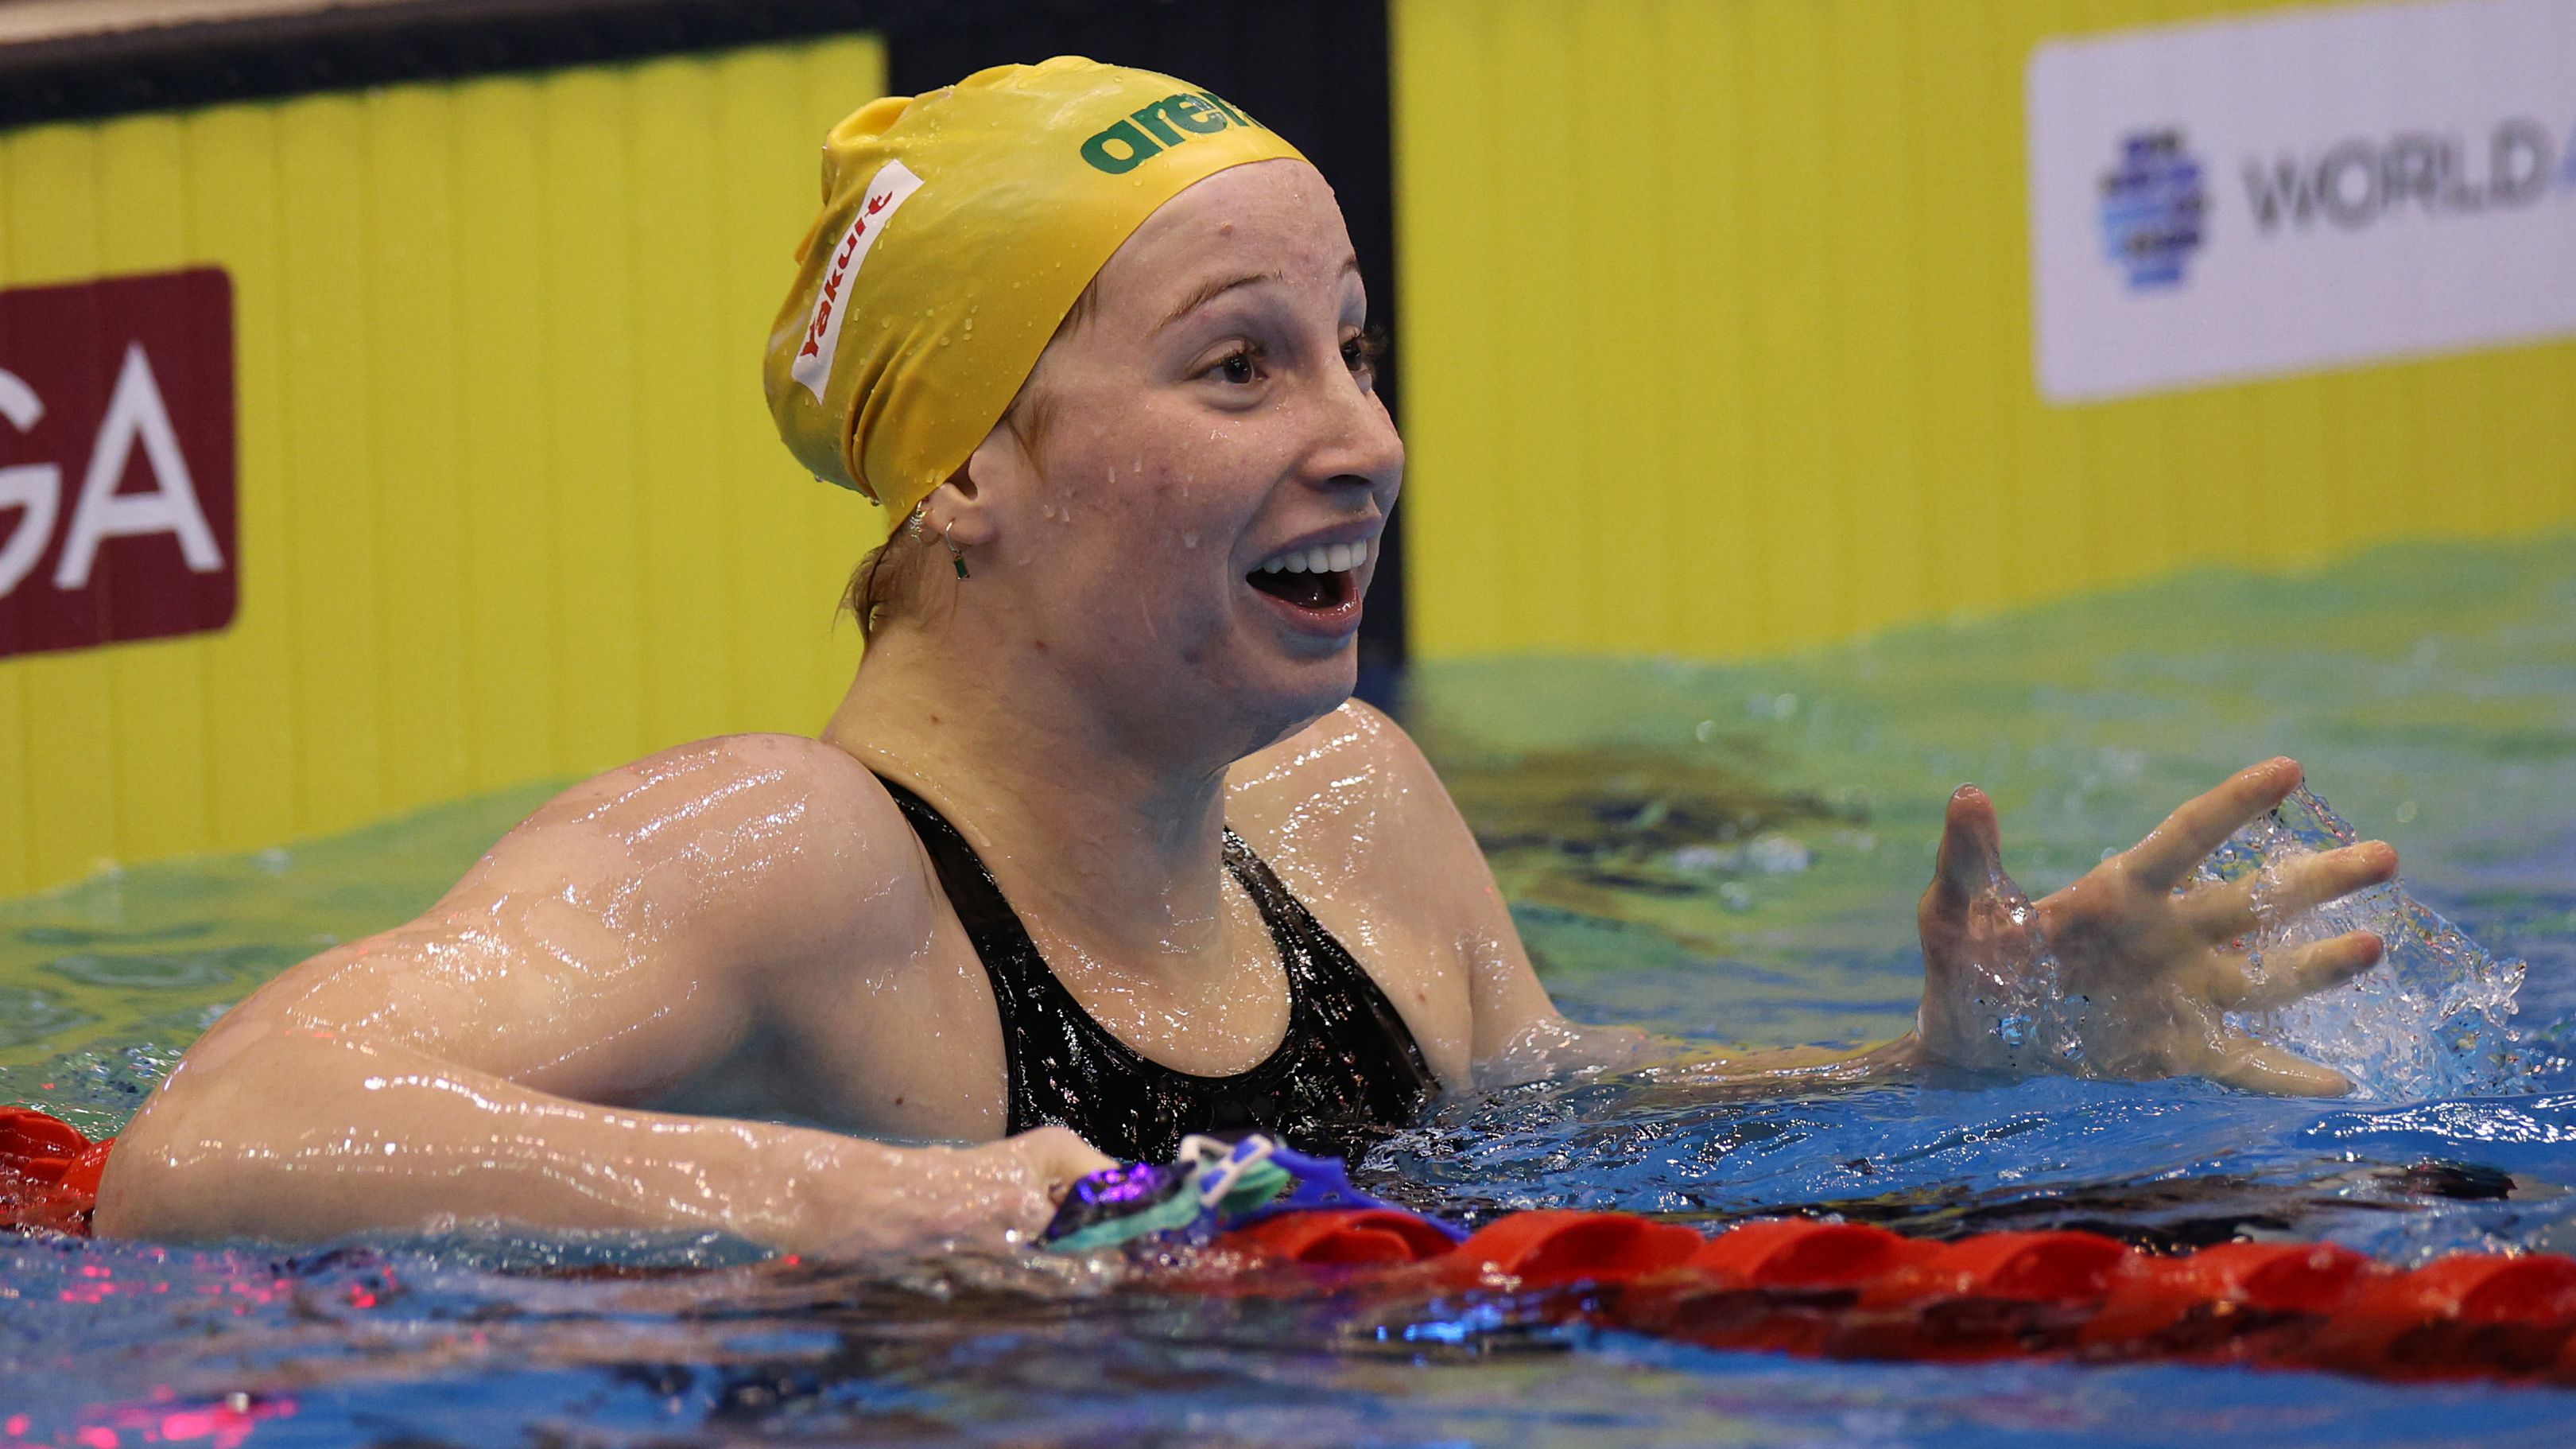 FUKUOKA, JAPAN - JULY 26: Mollie O&#x27;Callaghan of Team Australia celebrates winning gold with a new WR time of: 1:52.85 in the Women&#x27;s 200m Freestyle Final on day four of the Fukuoka 2023 World Aquatics Championships at Marine Messe Fukuoka Hall A on July 26, 2023 in Fukuoka, Japan. (Photo by Adam Pretty/Getty Images)